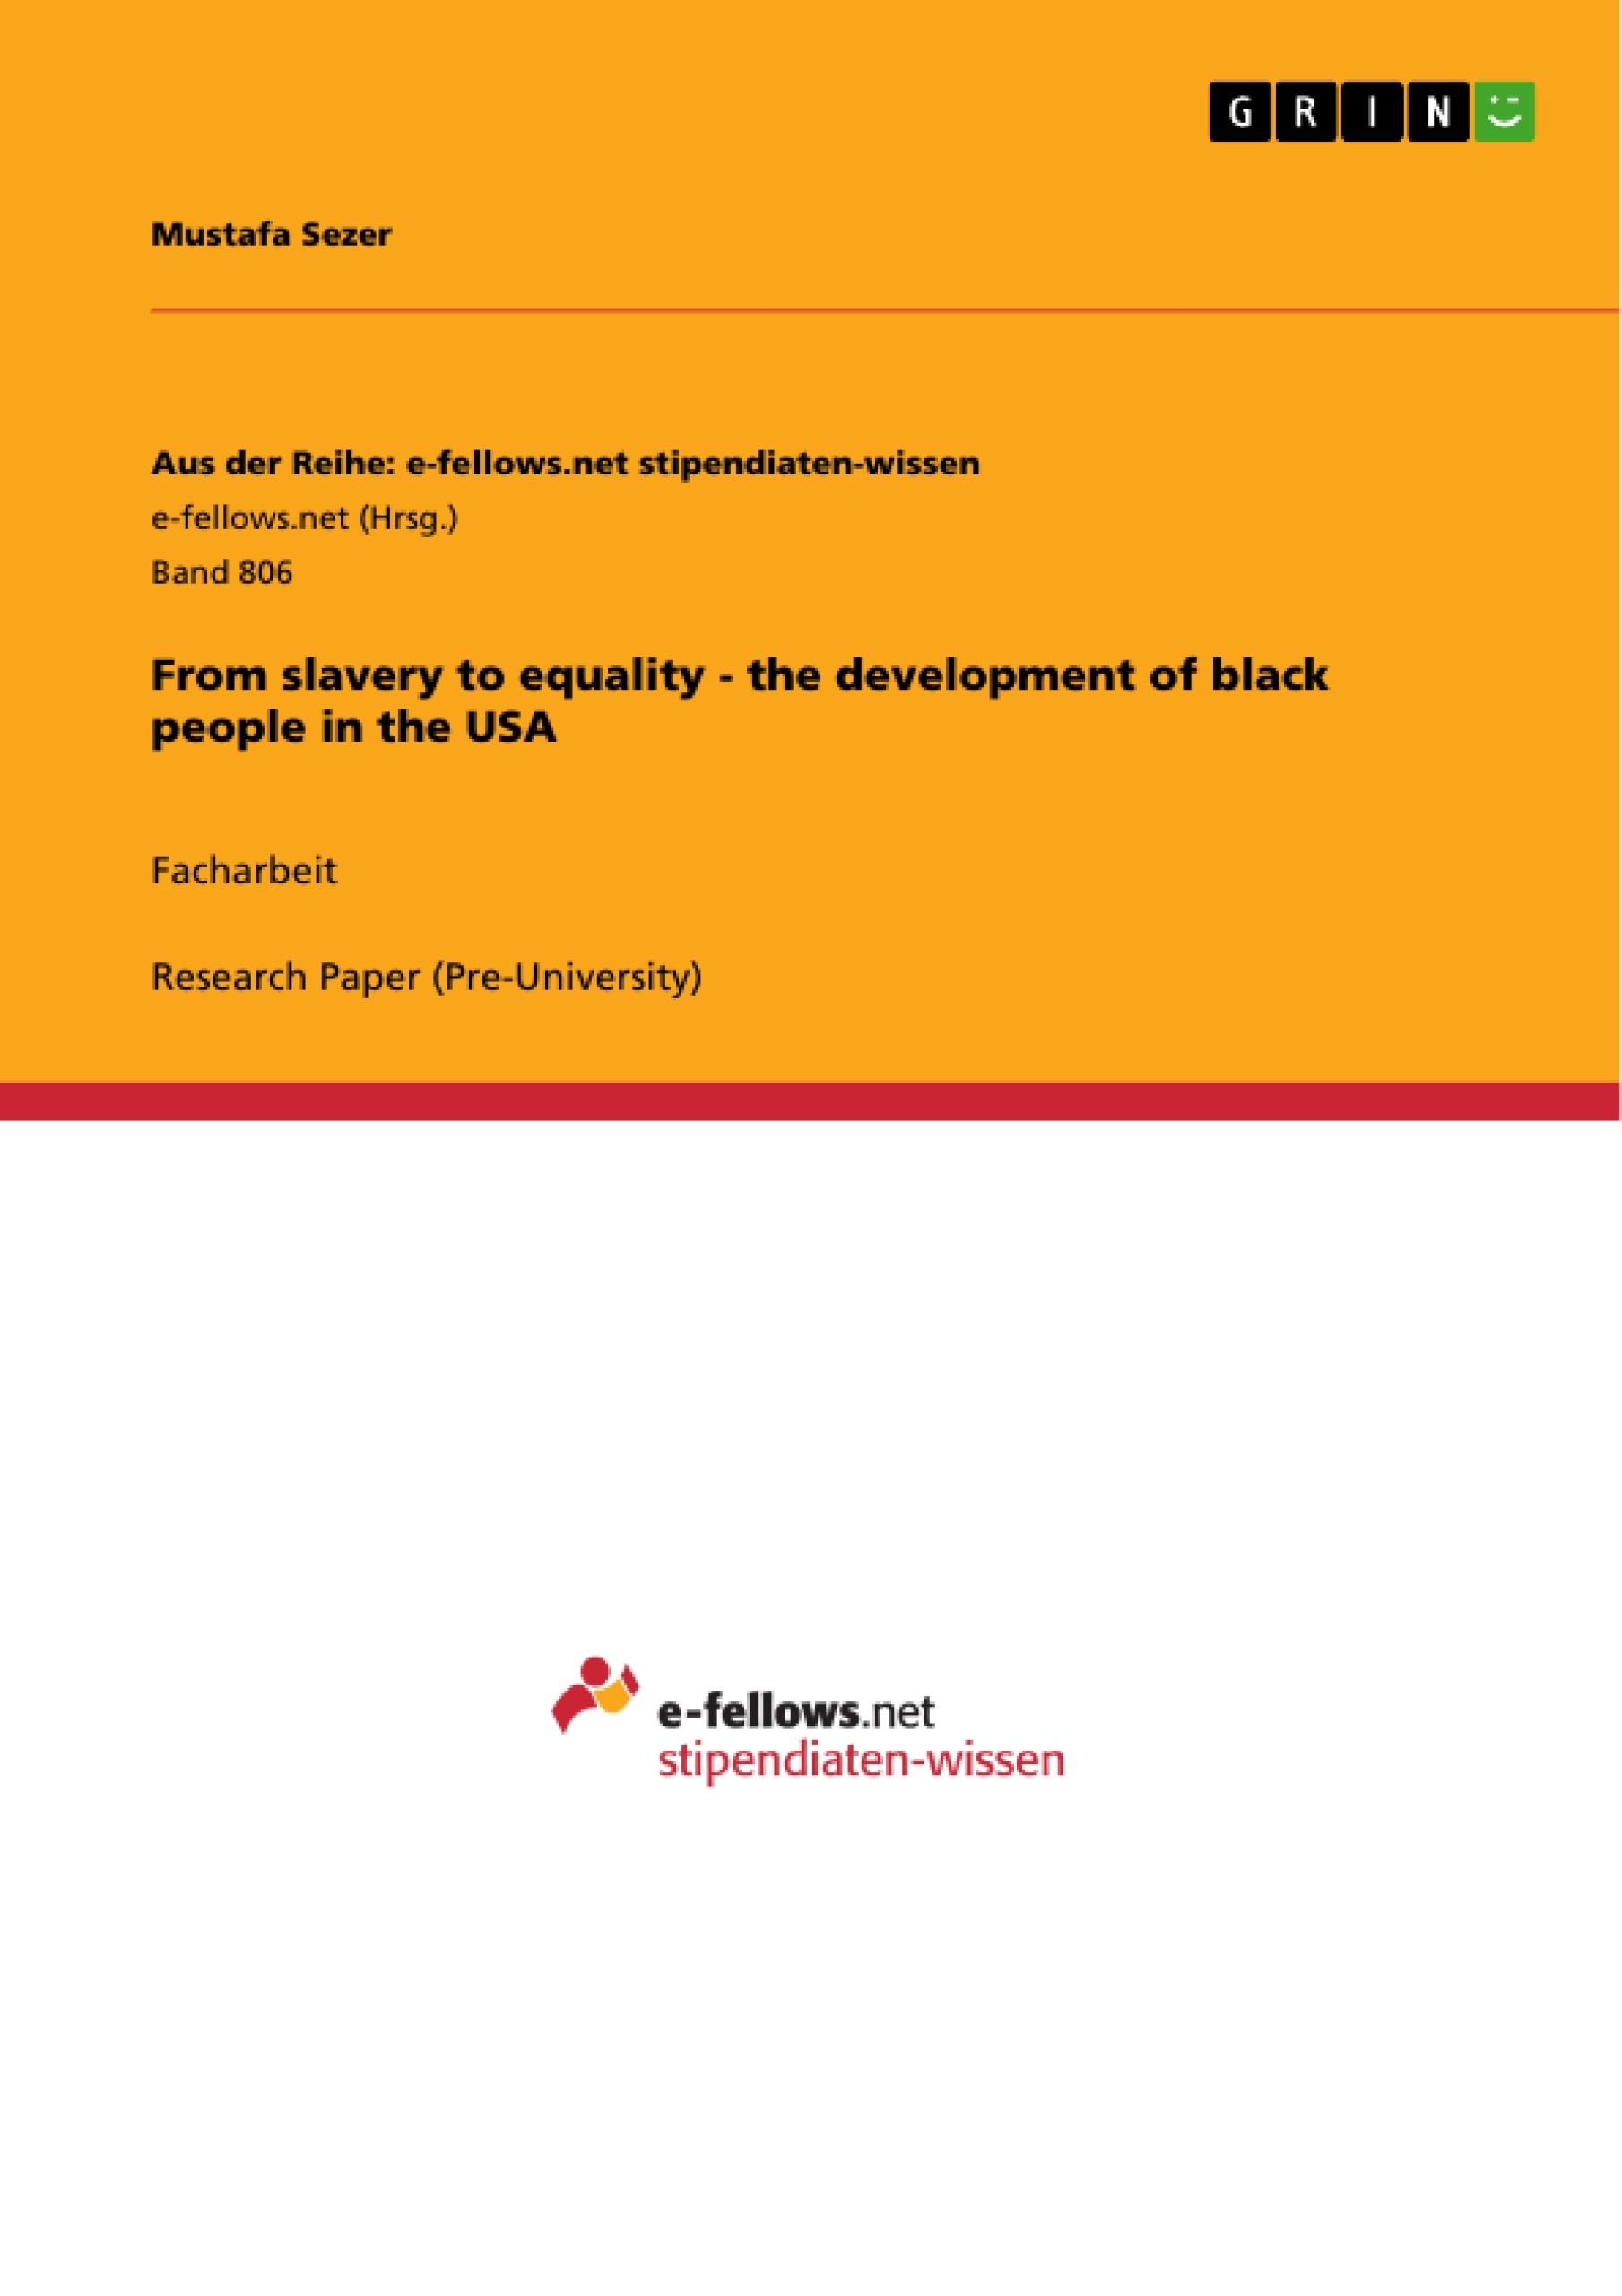 Title: From slavery to equality - the development of black people in the USA